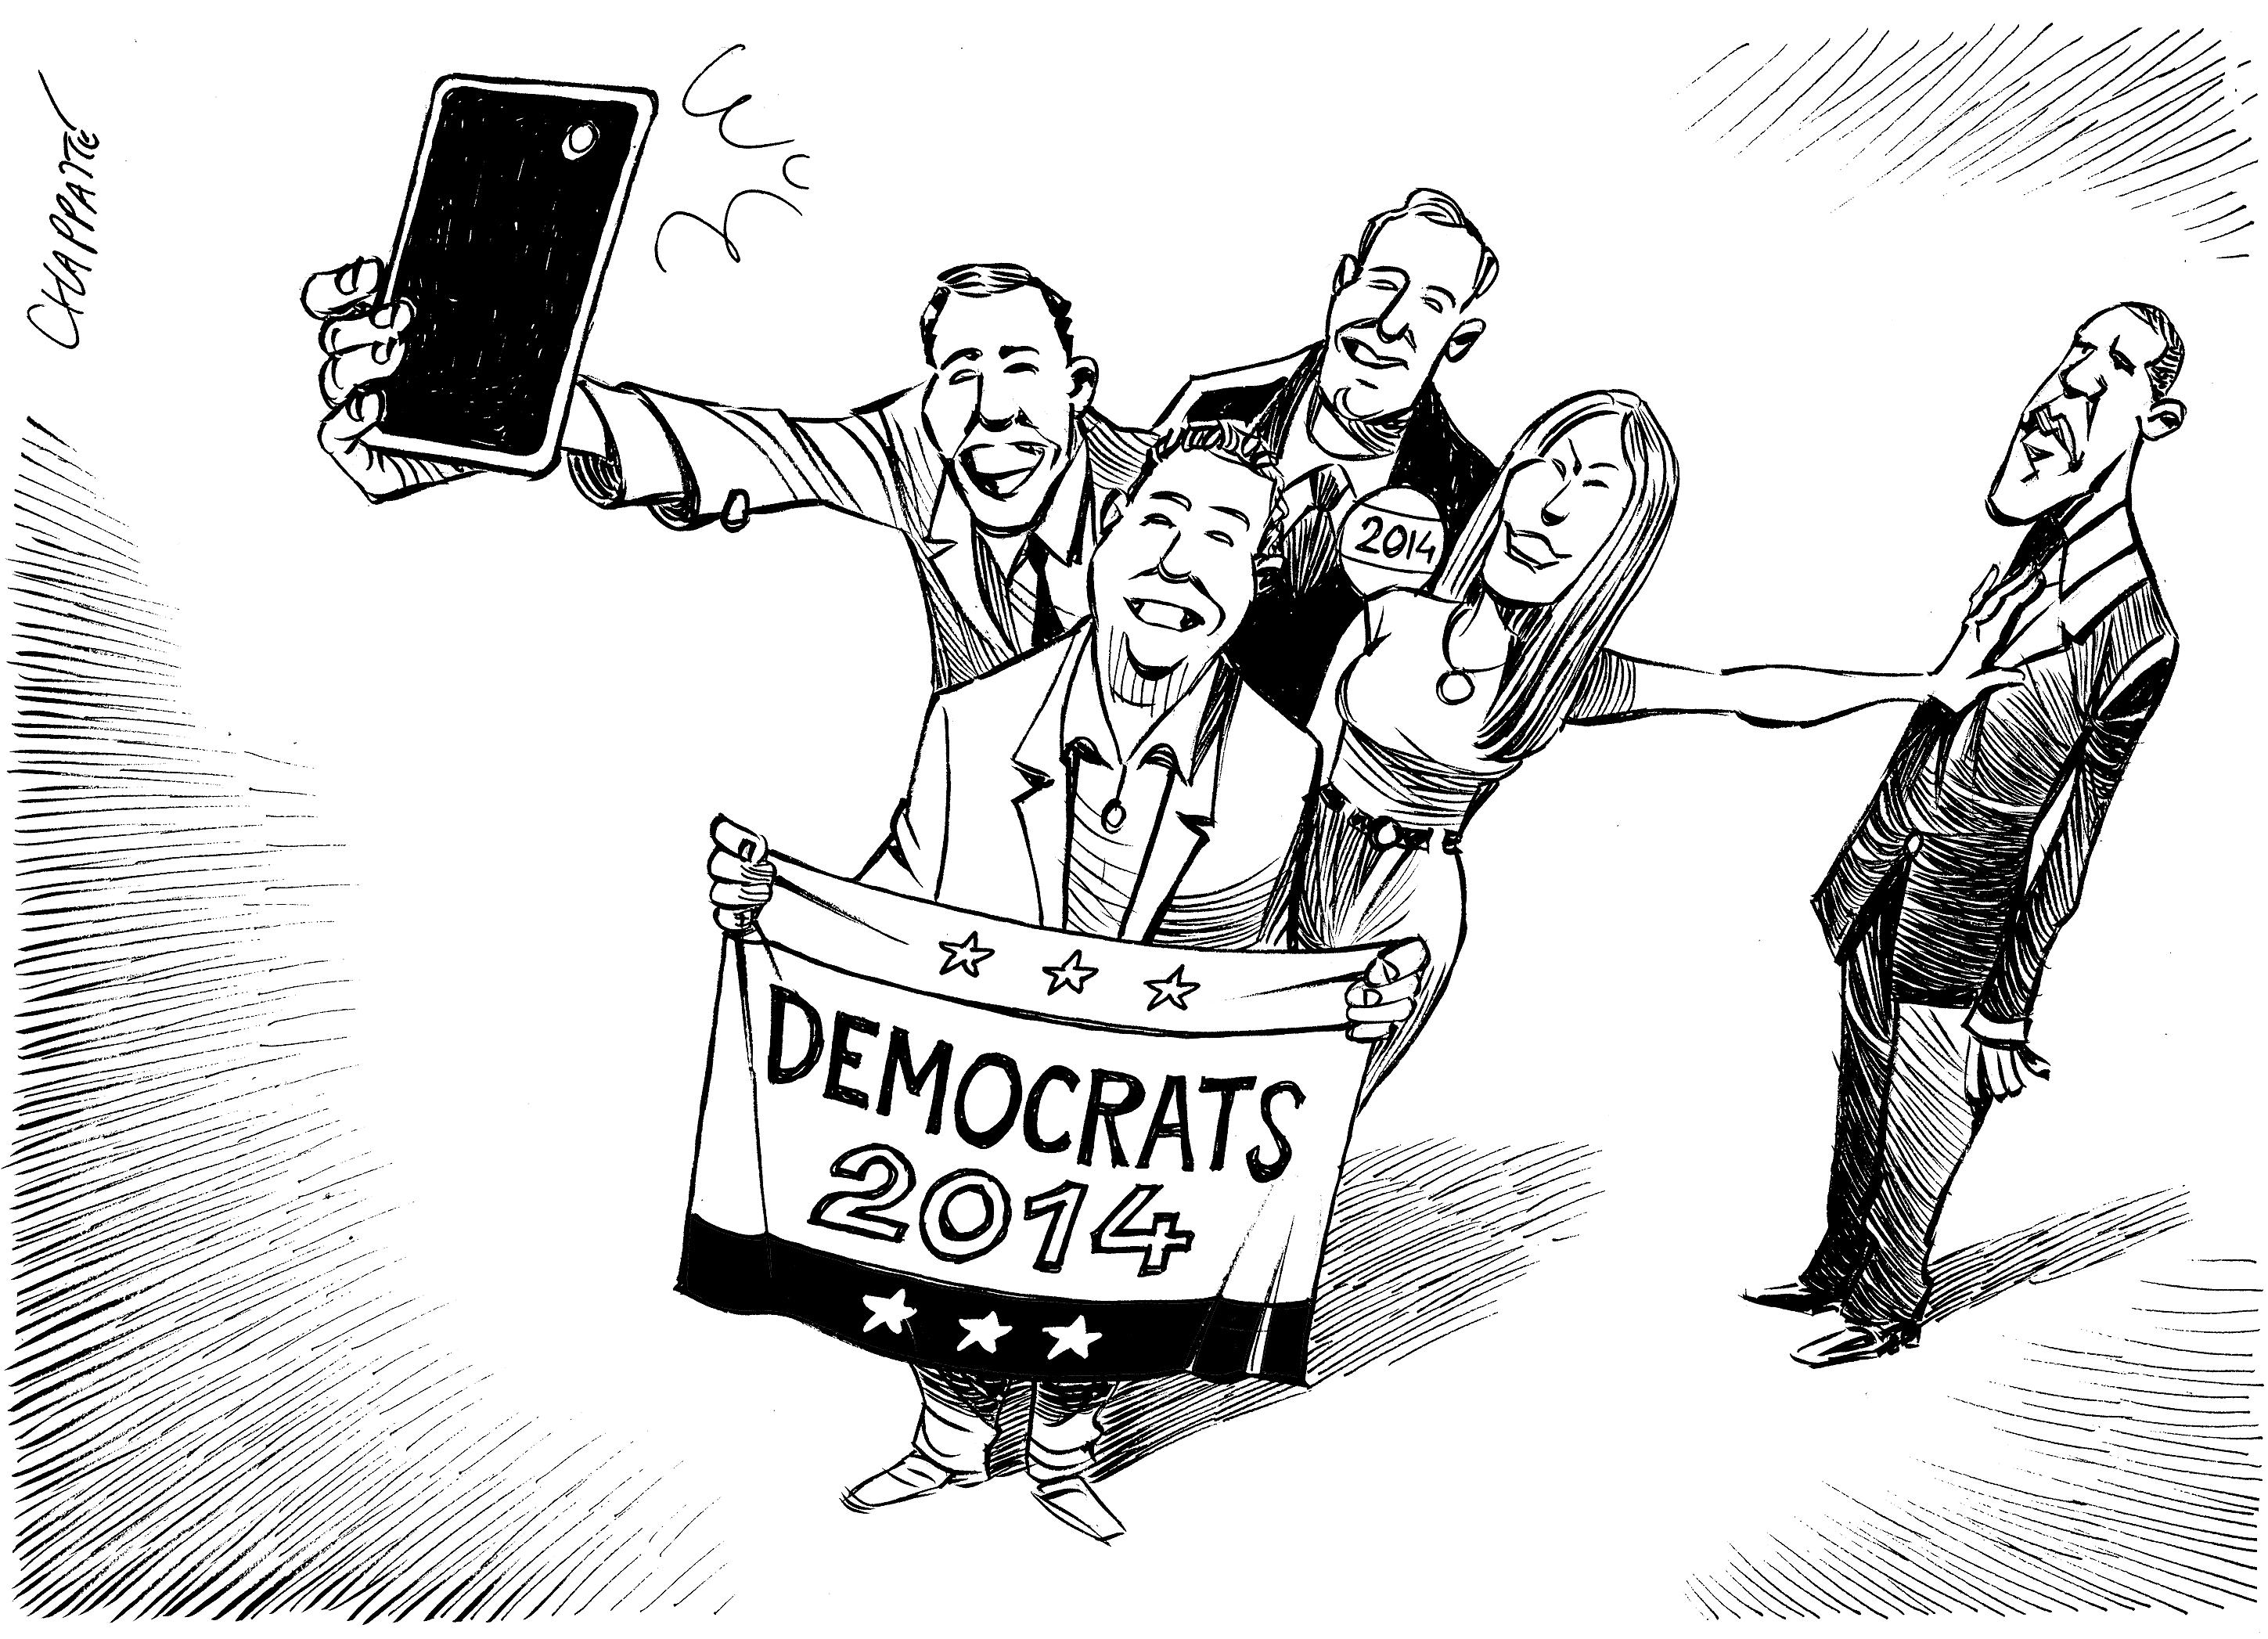 Obama and the Democrats